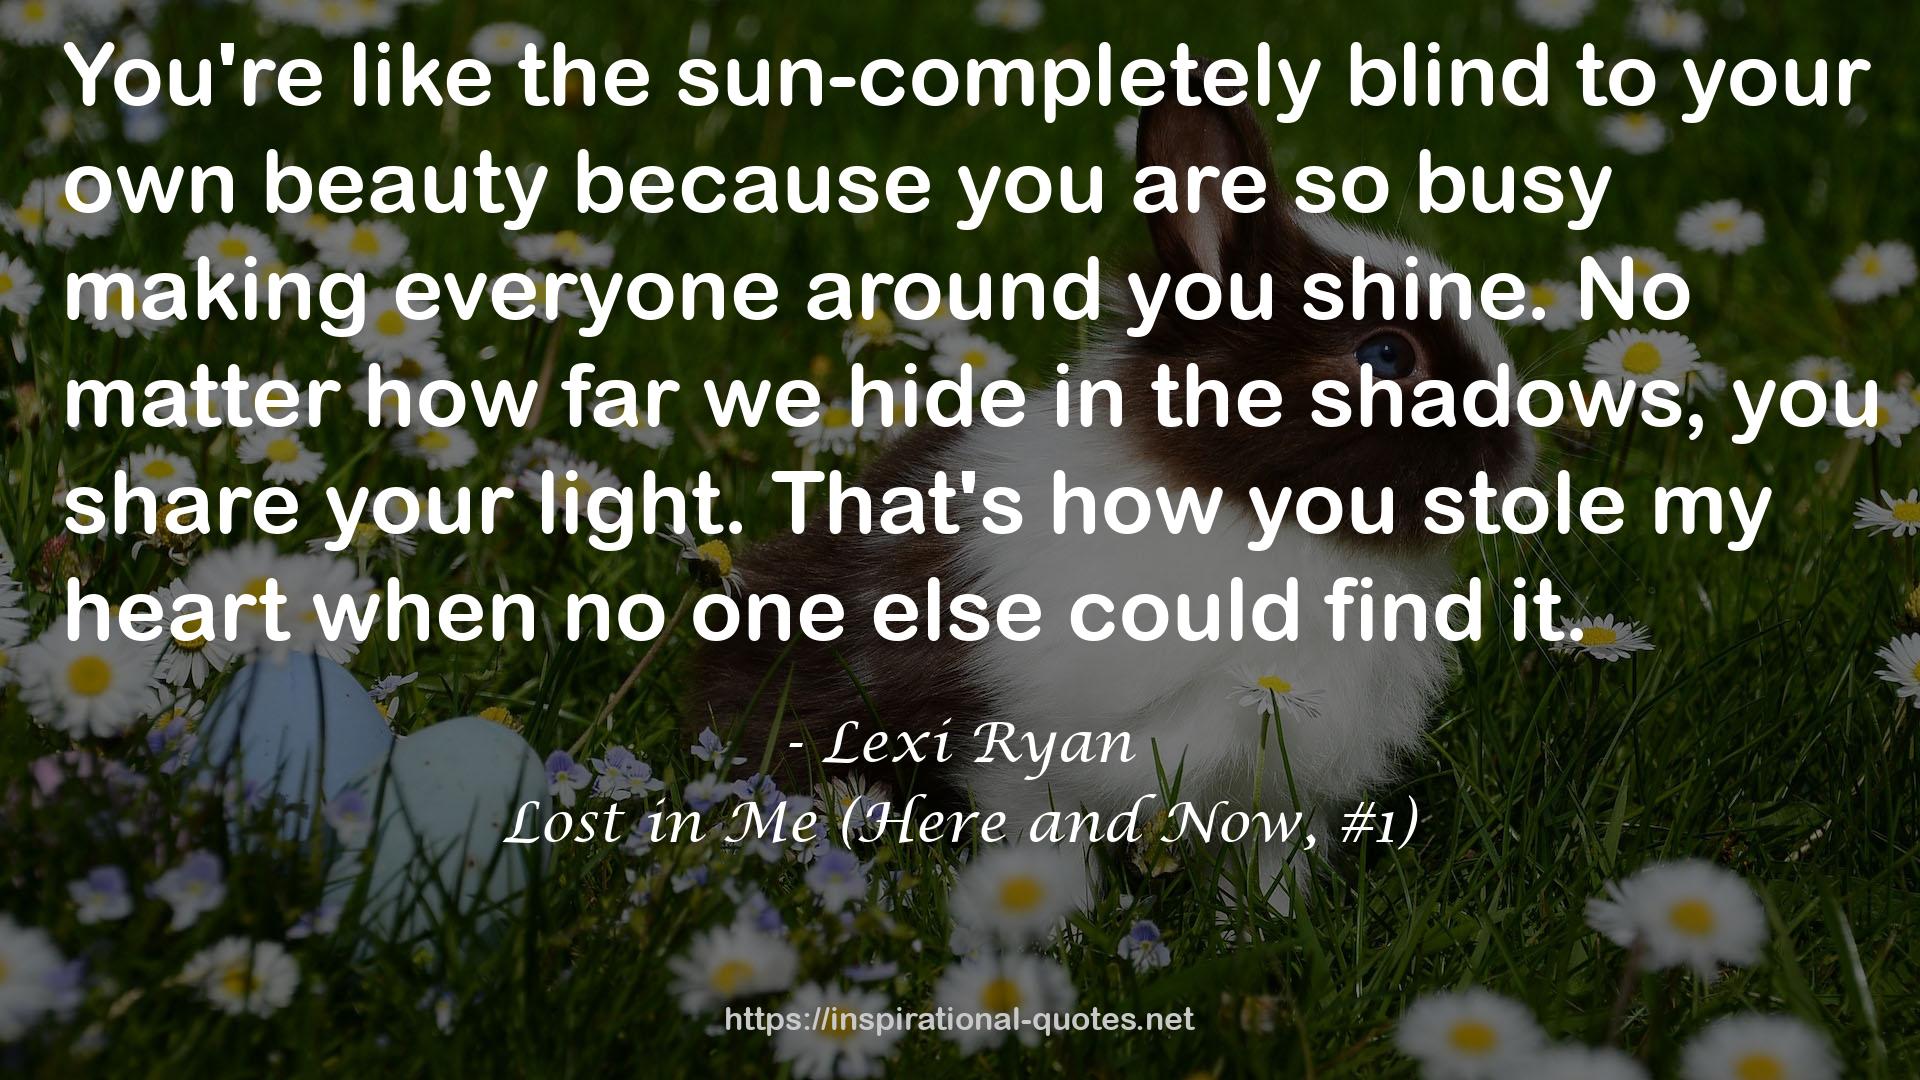 Lost in Me (Here and Now, #1) QUOTES